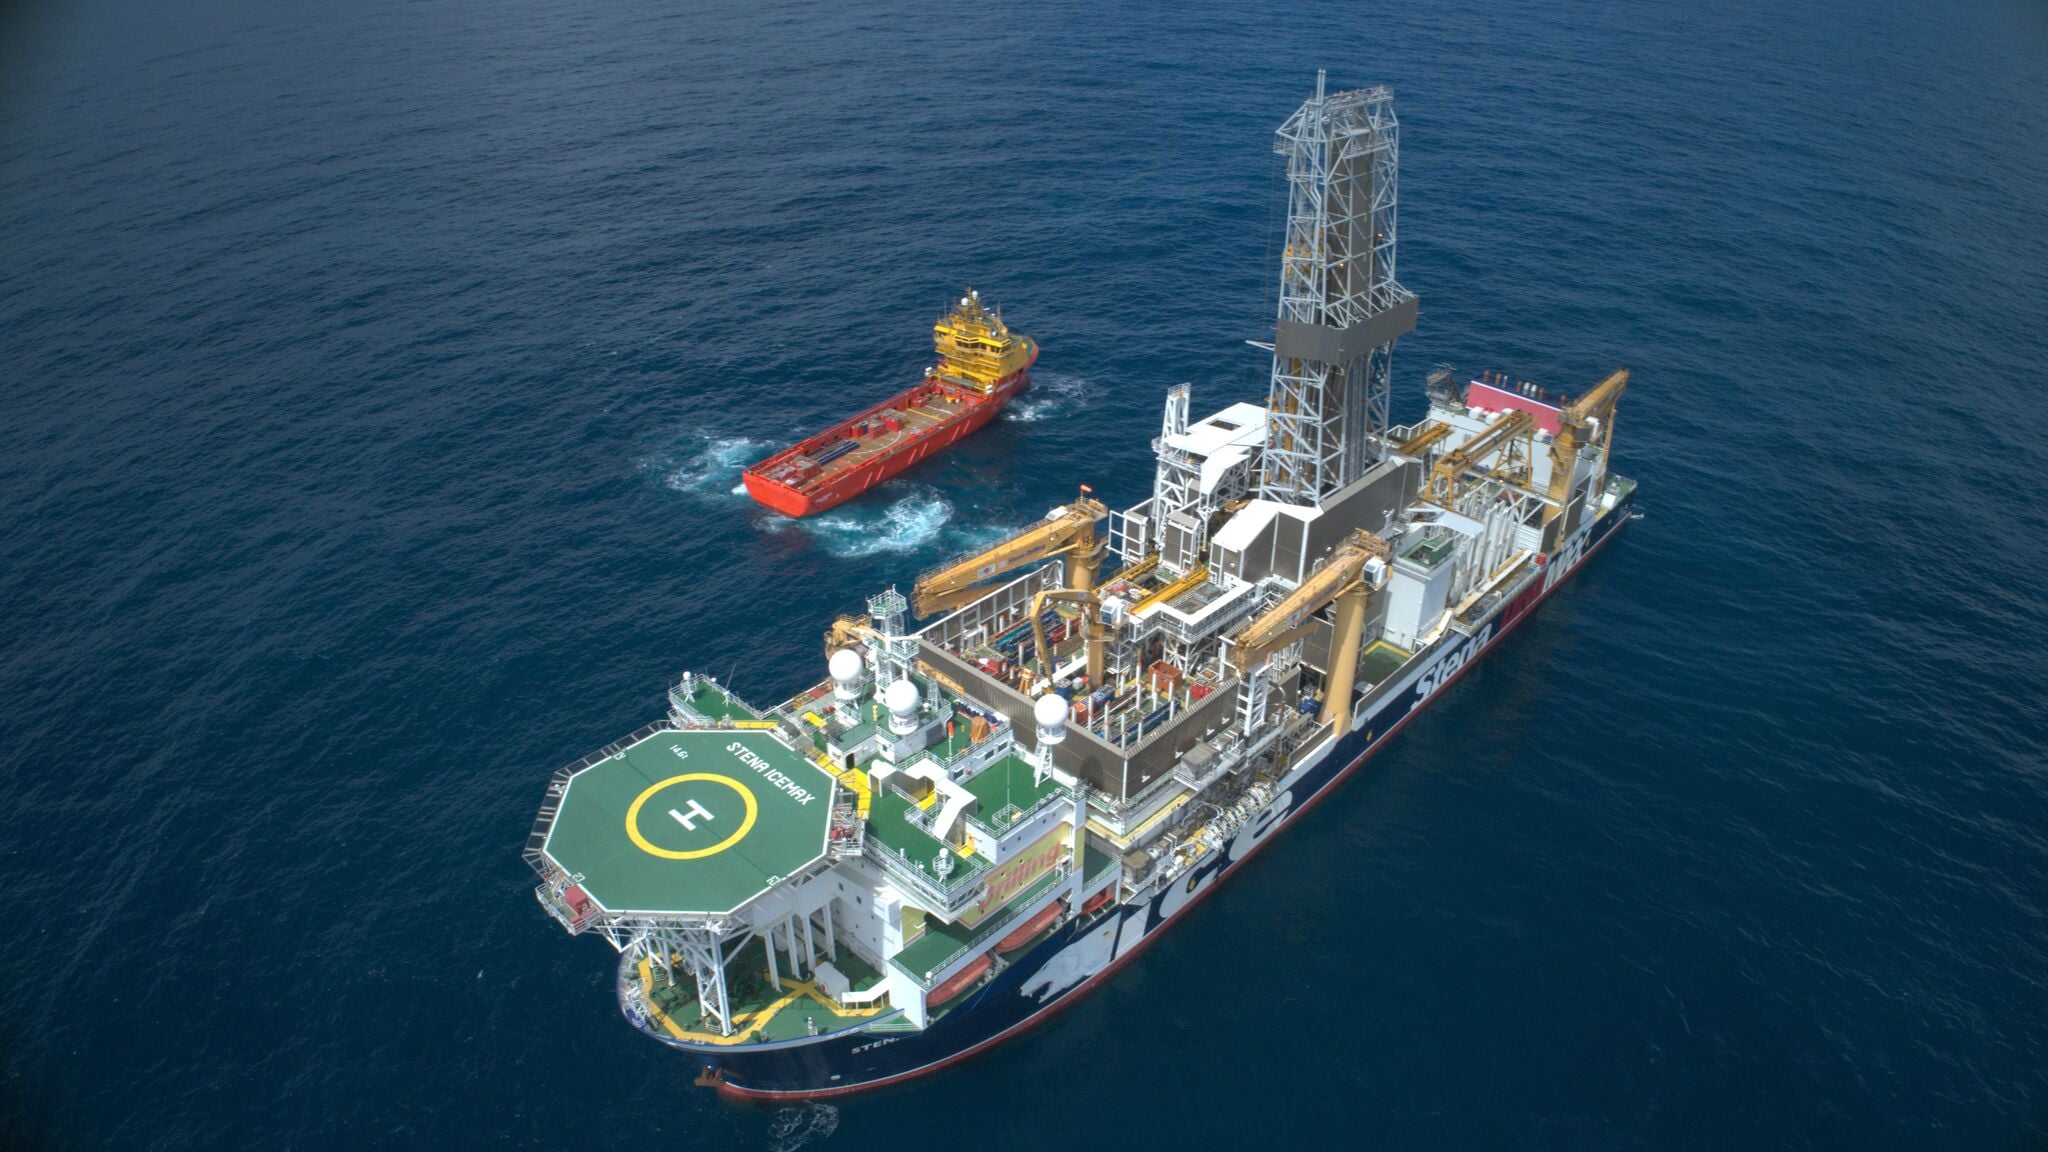 Stena Drilling signs a drilling contract with Spanish oil company Repsol for operations offshore Mexico